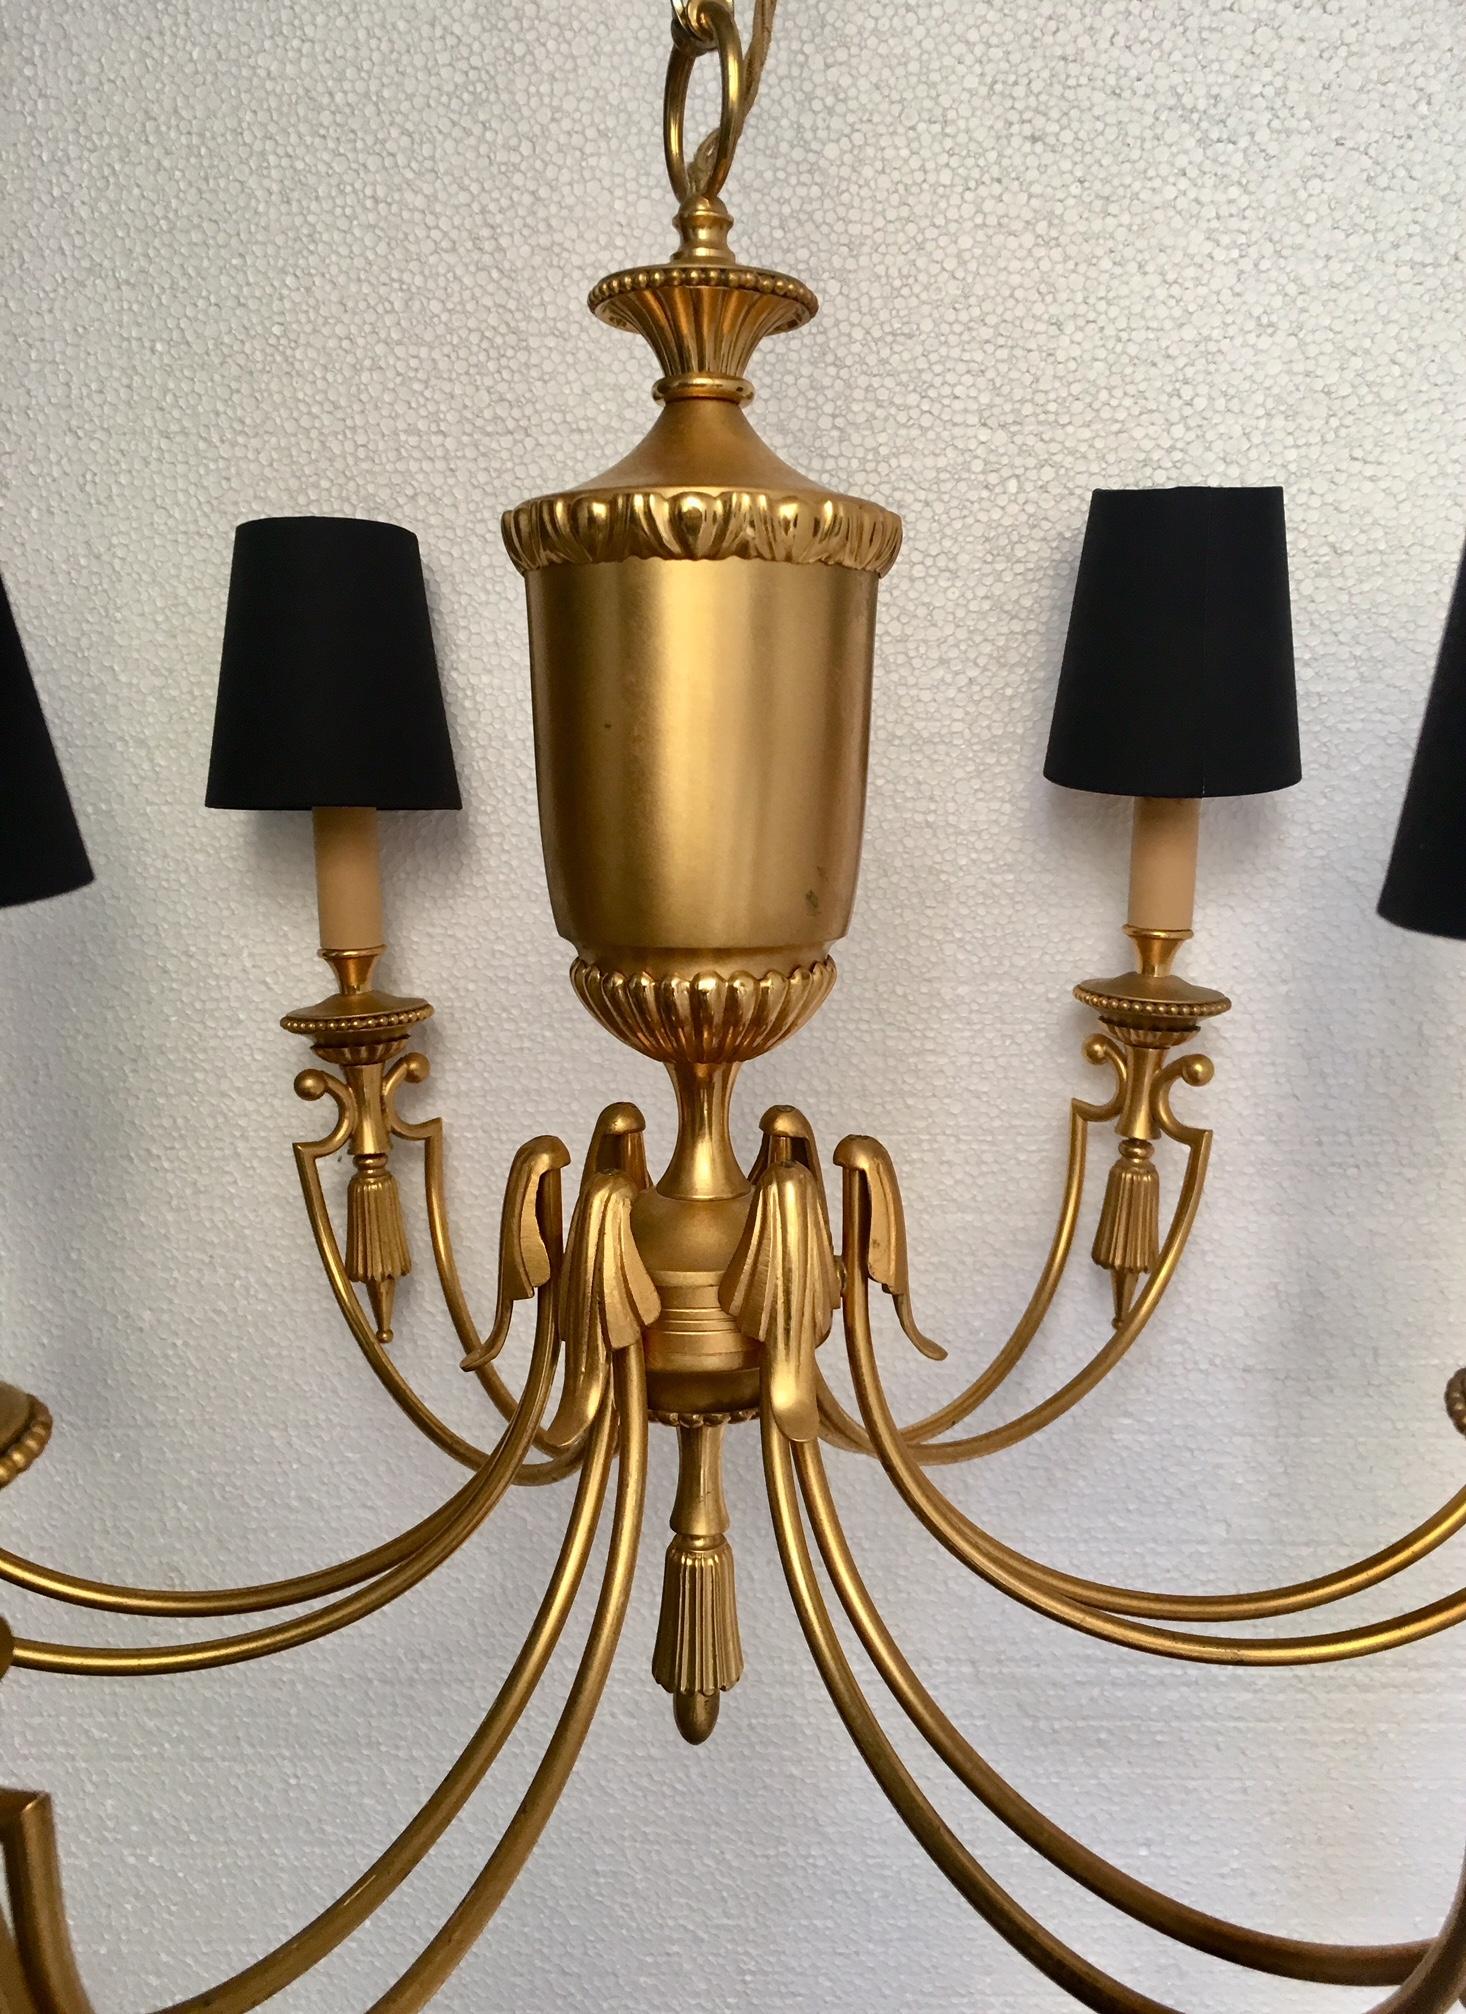 Elegant gilded metal and bronze midcentury chandelier, Jansen composes the central part of the lamp in the shape of a vase from which the six arms that support the lights come out, with decoration in the form of leaves in its lower part. Black lamp